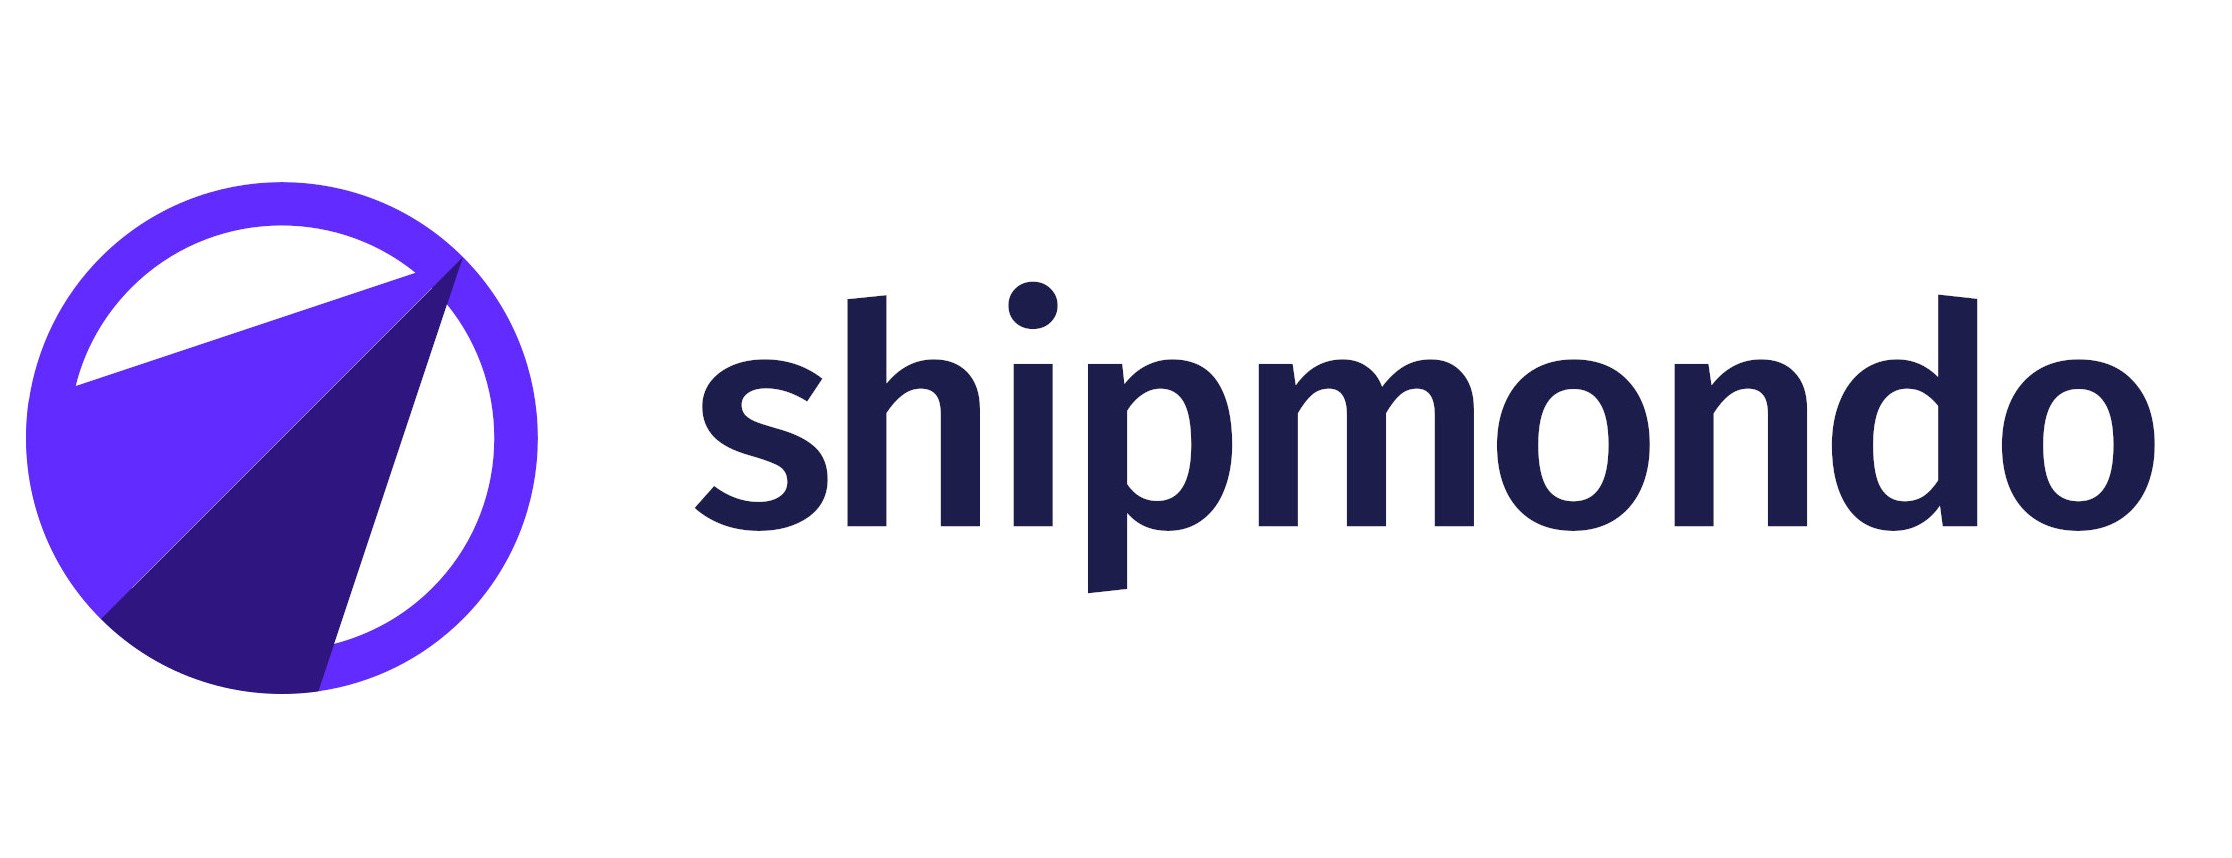 Free delivery with Shipmondo - Endepunkt - day